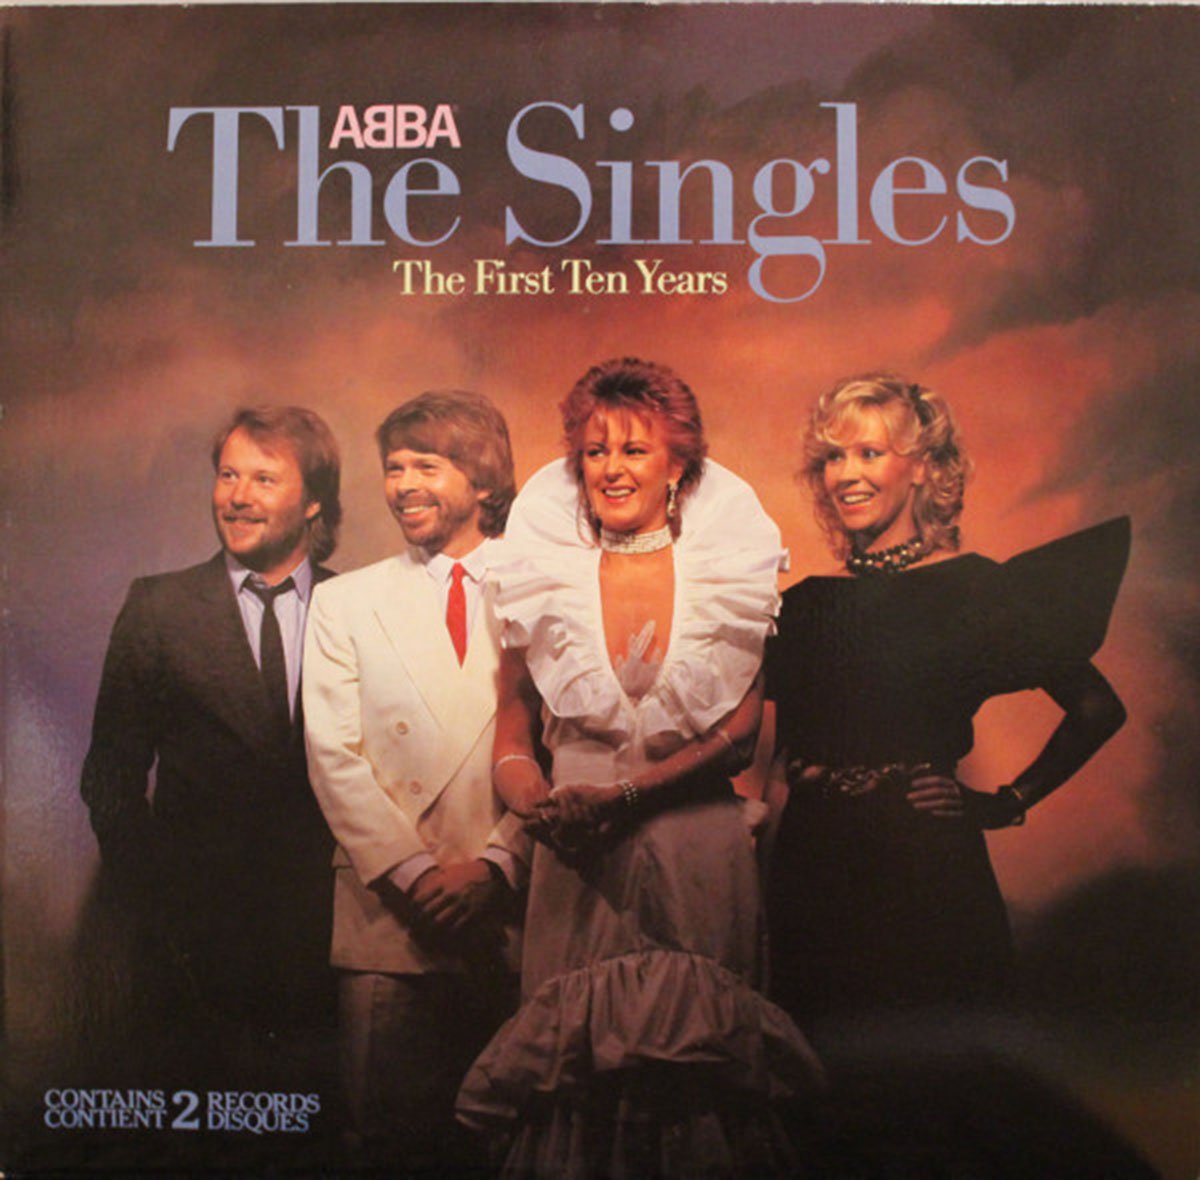 ABBA – The Singles - The First Ten Years